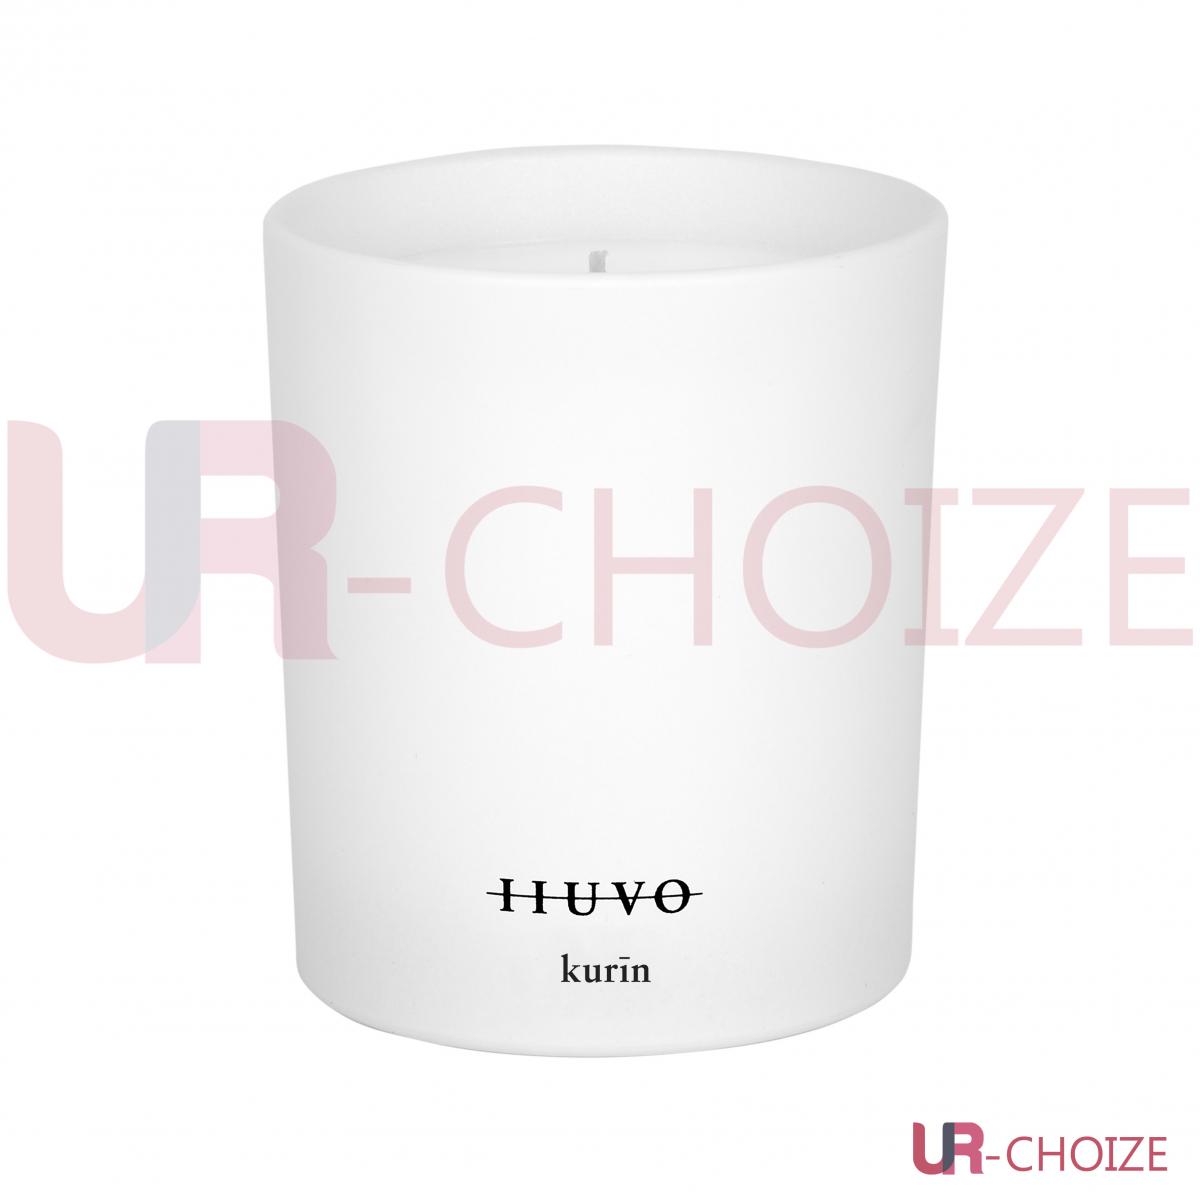 IIUVO Kurin scented candle - 190g (Parallel Inlet) Packaging is slightly flawed